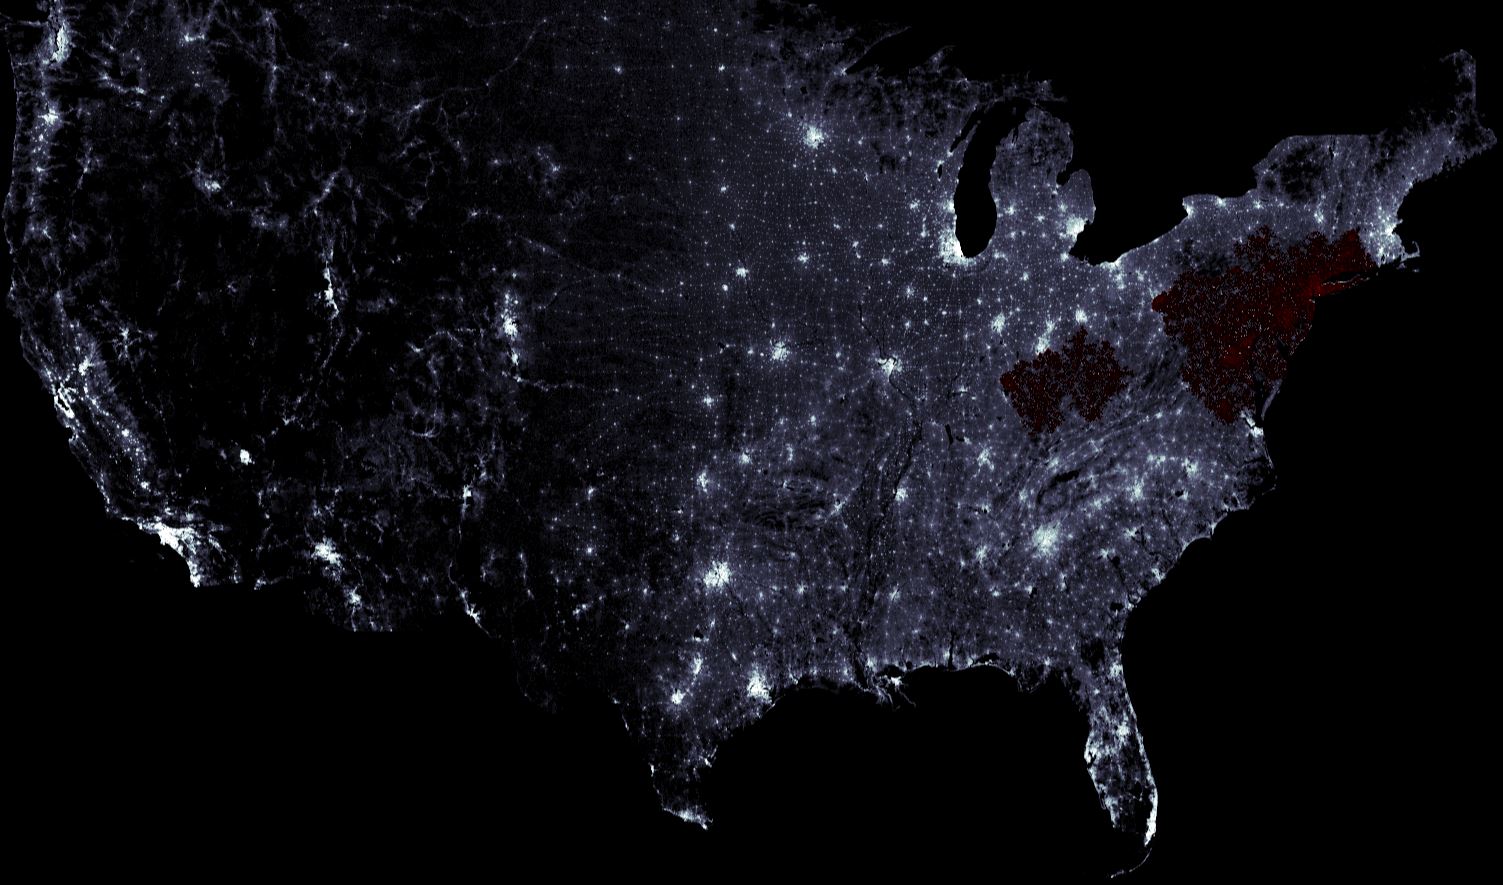 How Would Your City Do in a Zombie Apocalypse? This Interactive Map Will Show You